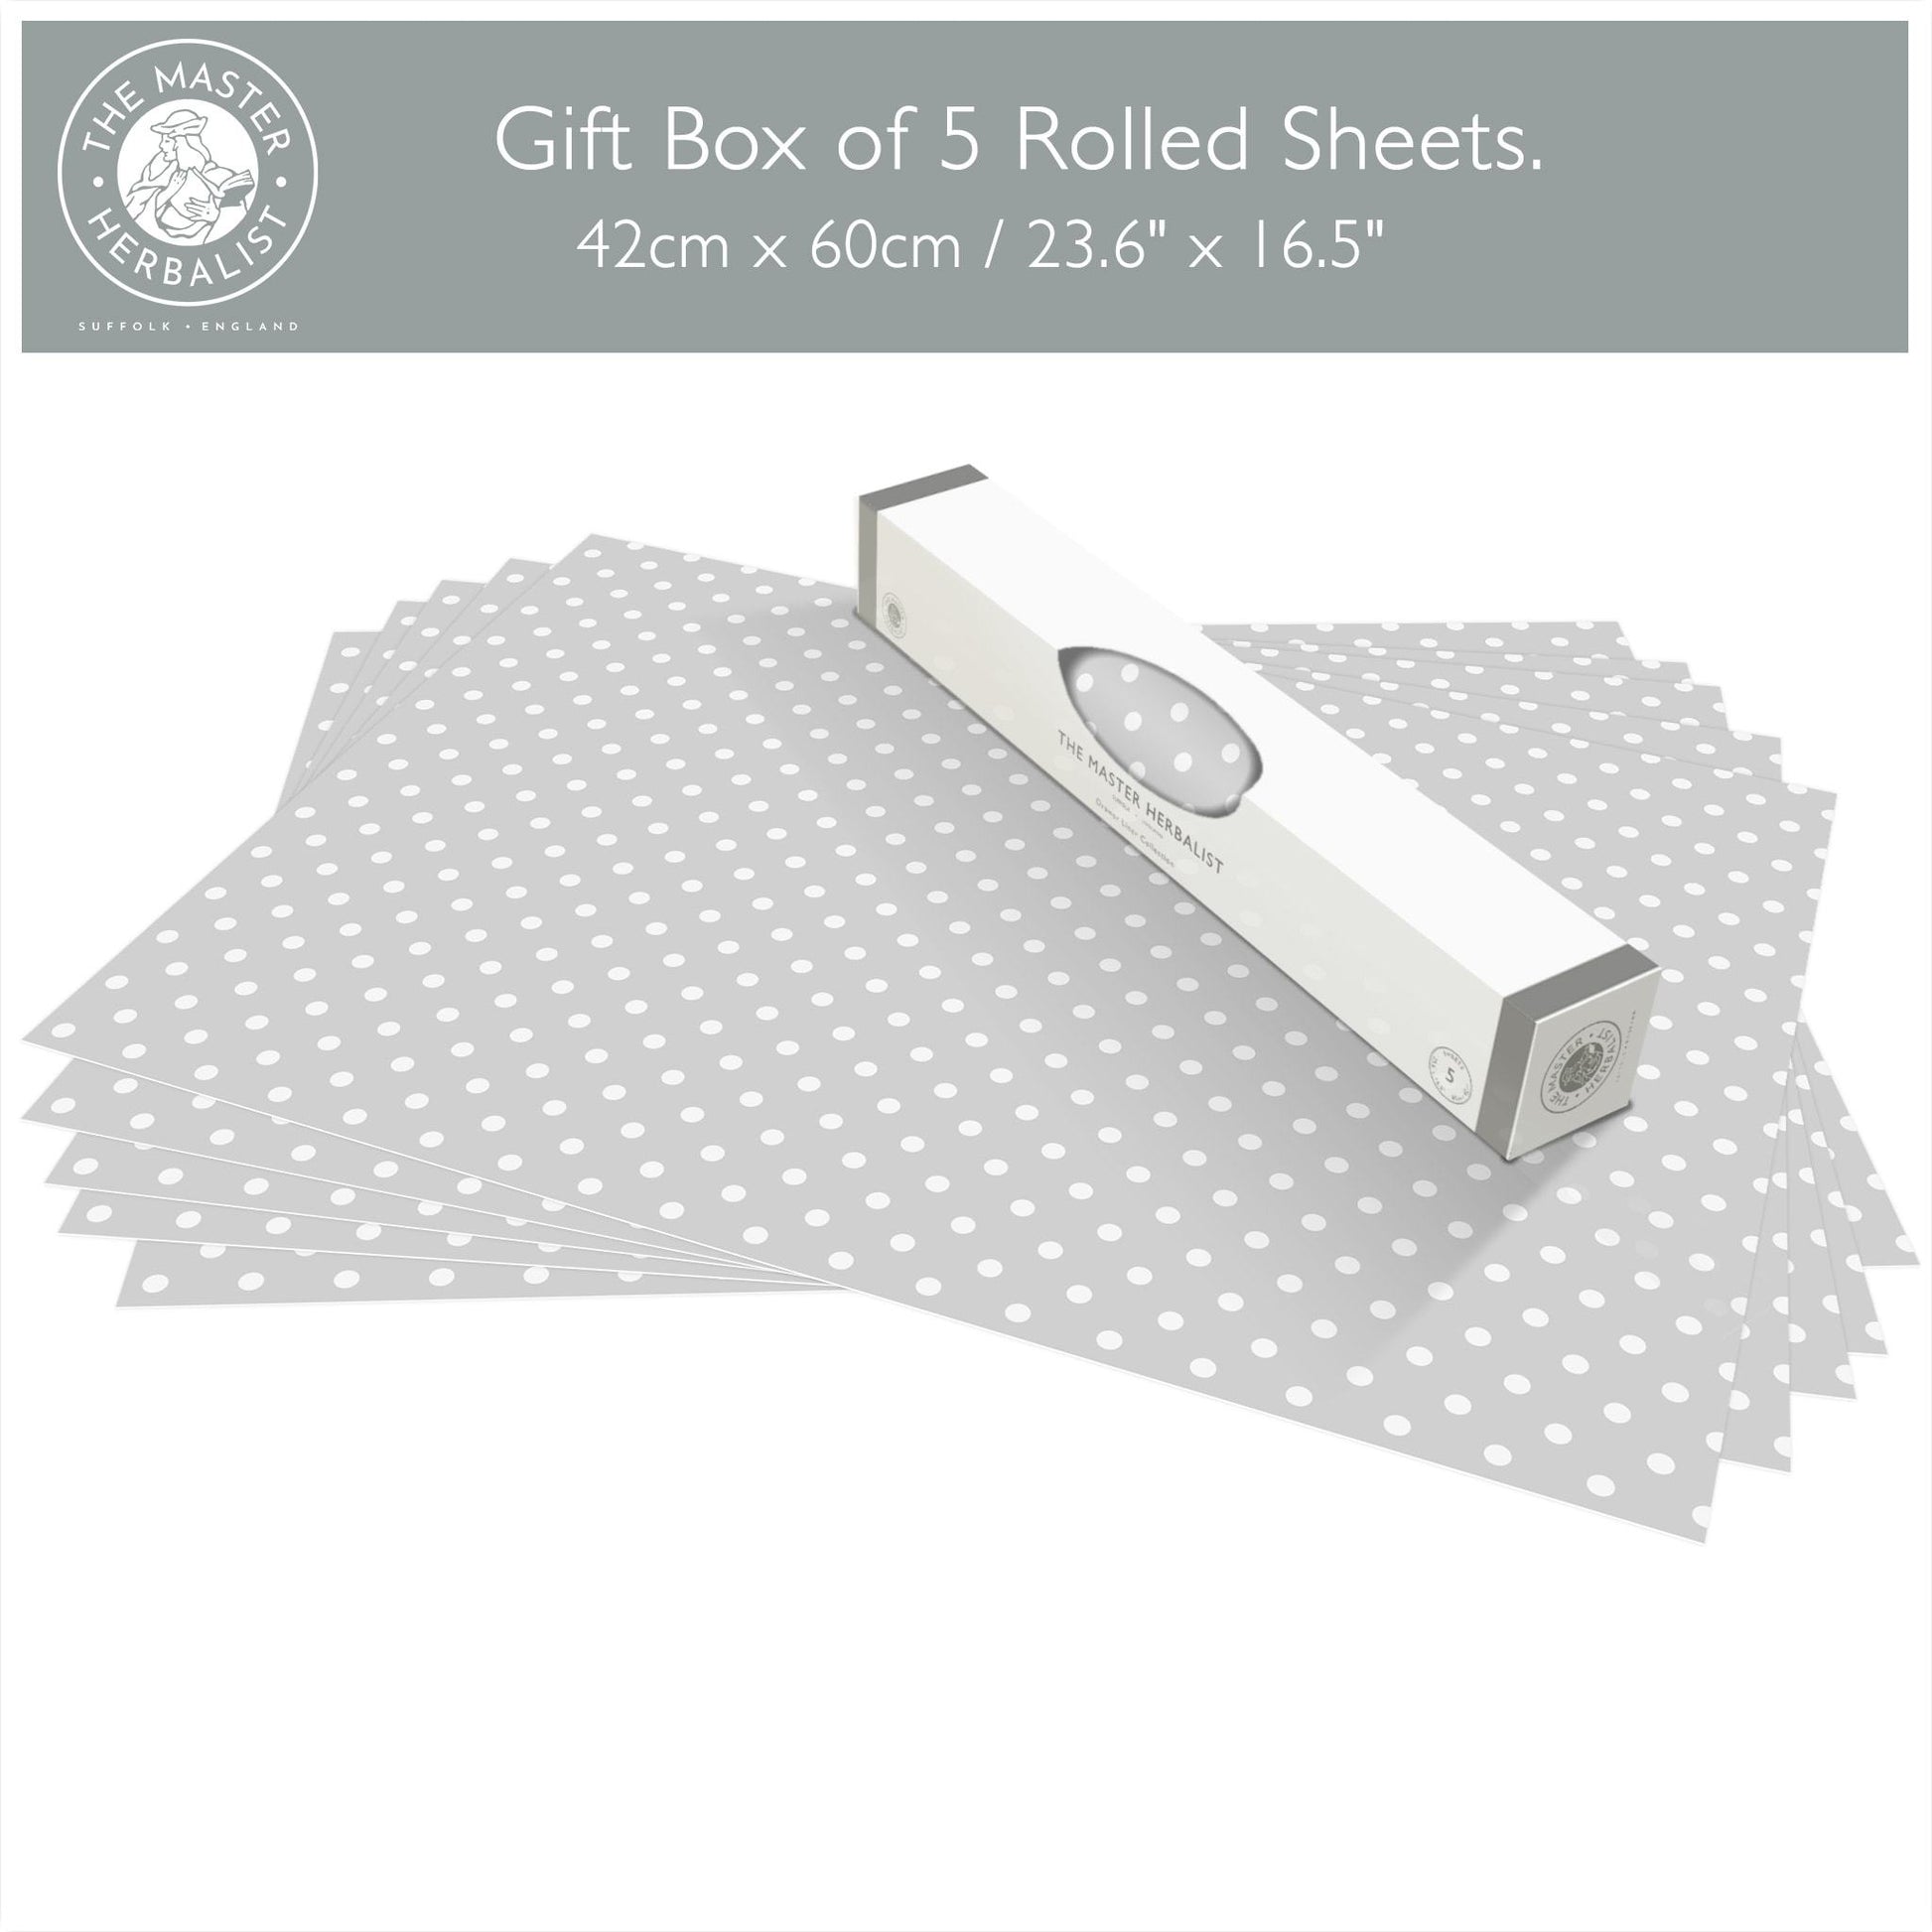 SIMPLY DRAWER LINERS | Wipe Clean & Unscented Drawer Liners in a SOFT GREY POLKA DOT Design. Perfect for Kitchen Drawers, Shelves, Cupboards & Cabinets. Made in Suffolk, England. (Soft Grey)